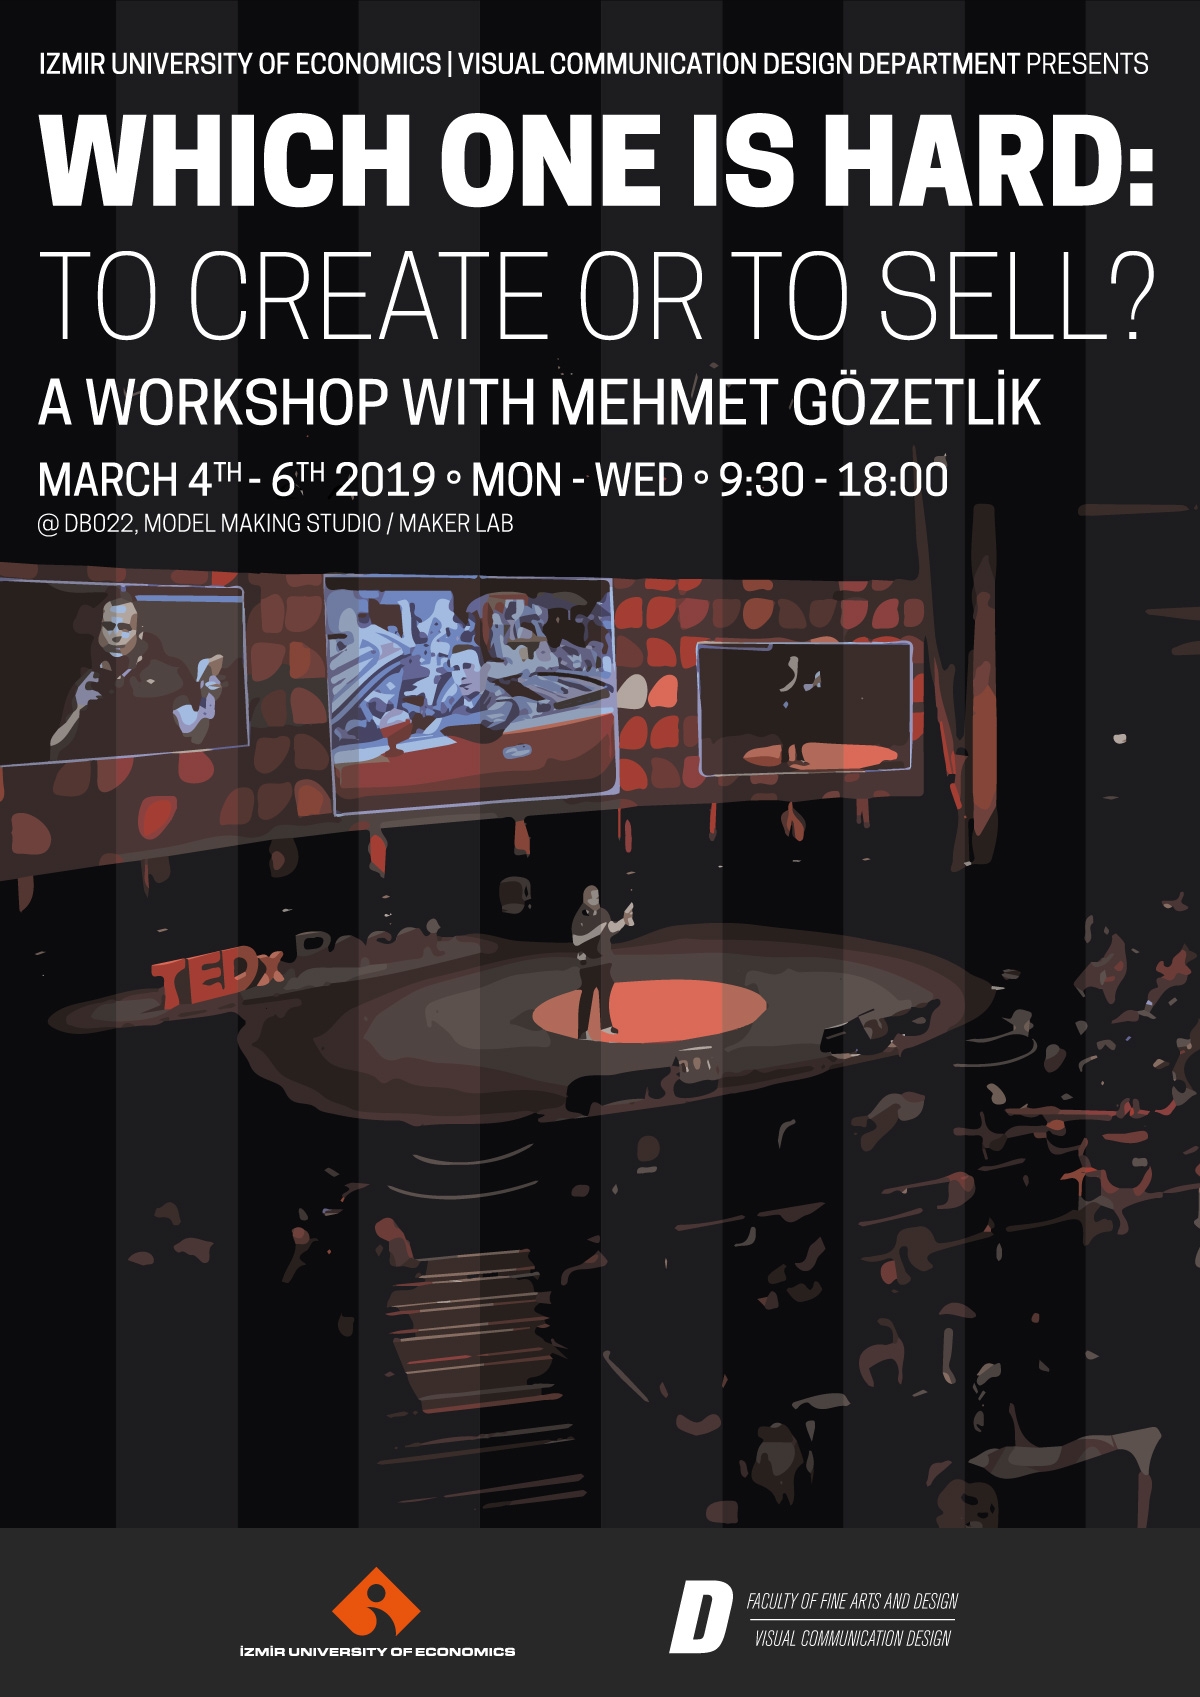 IUE Visual Communication Design Department “Which one is Hard: To Create or to Sell?” Workshop